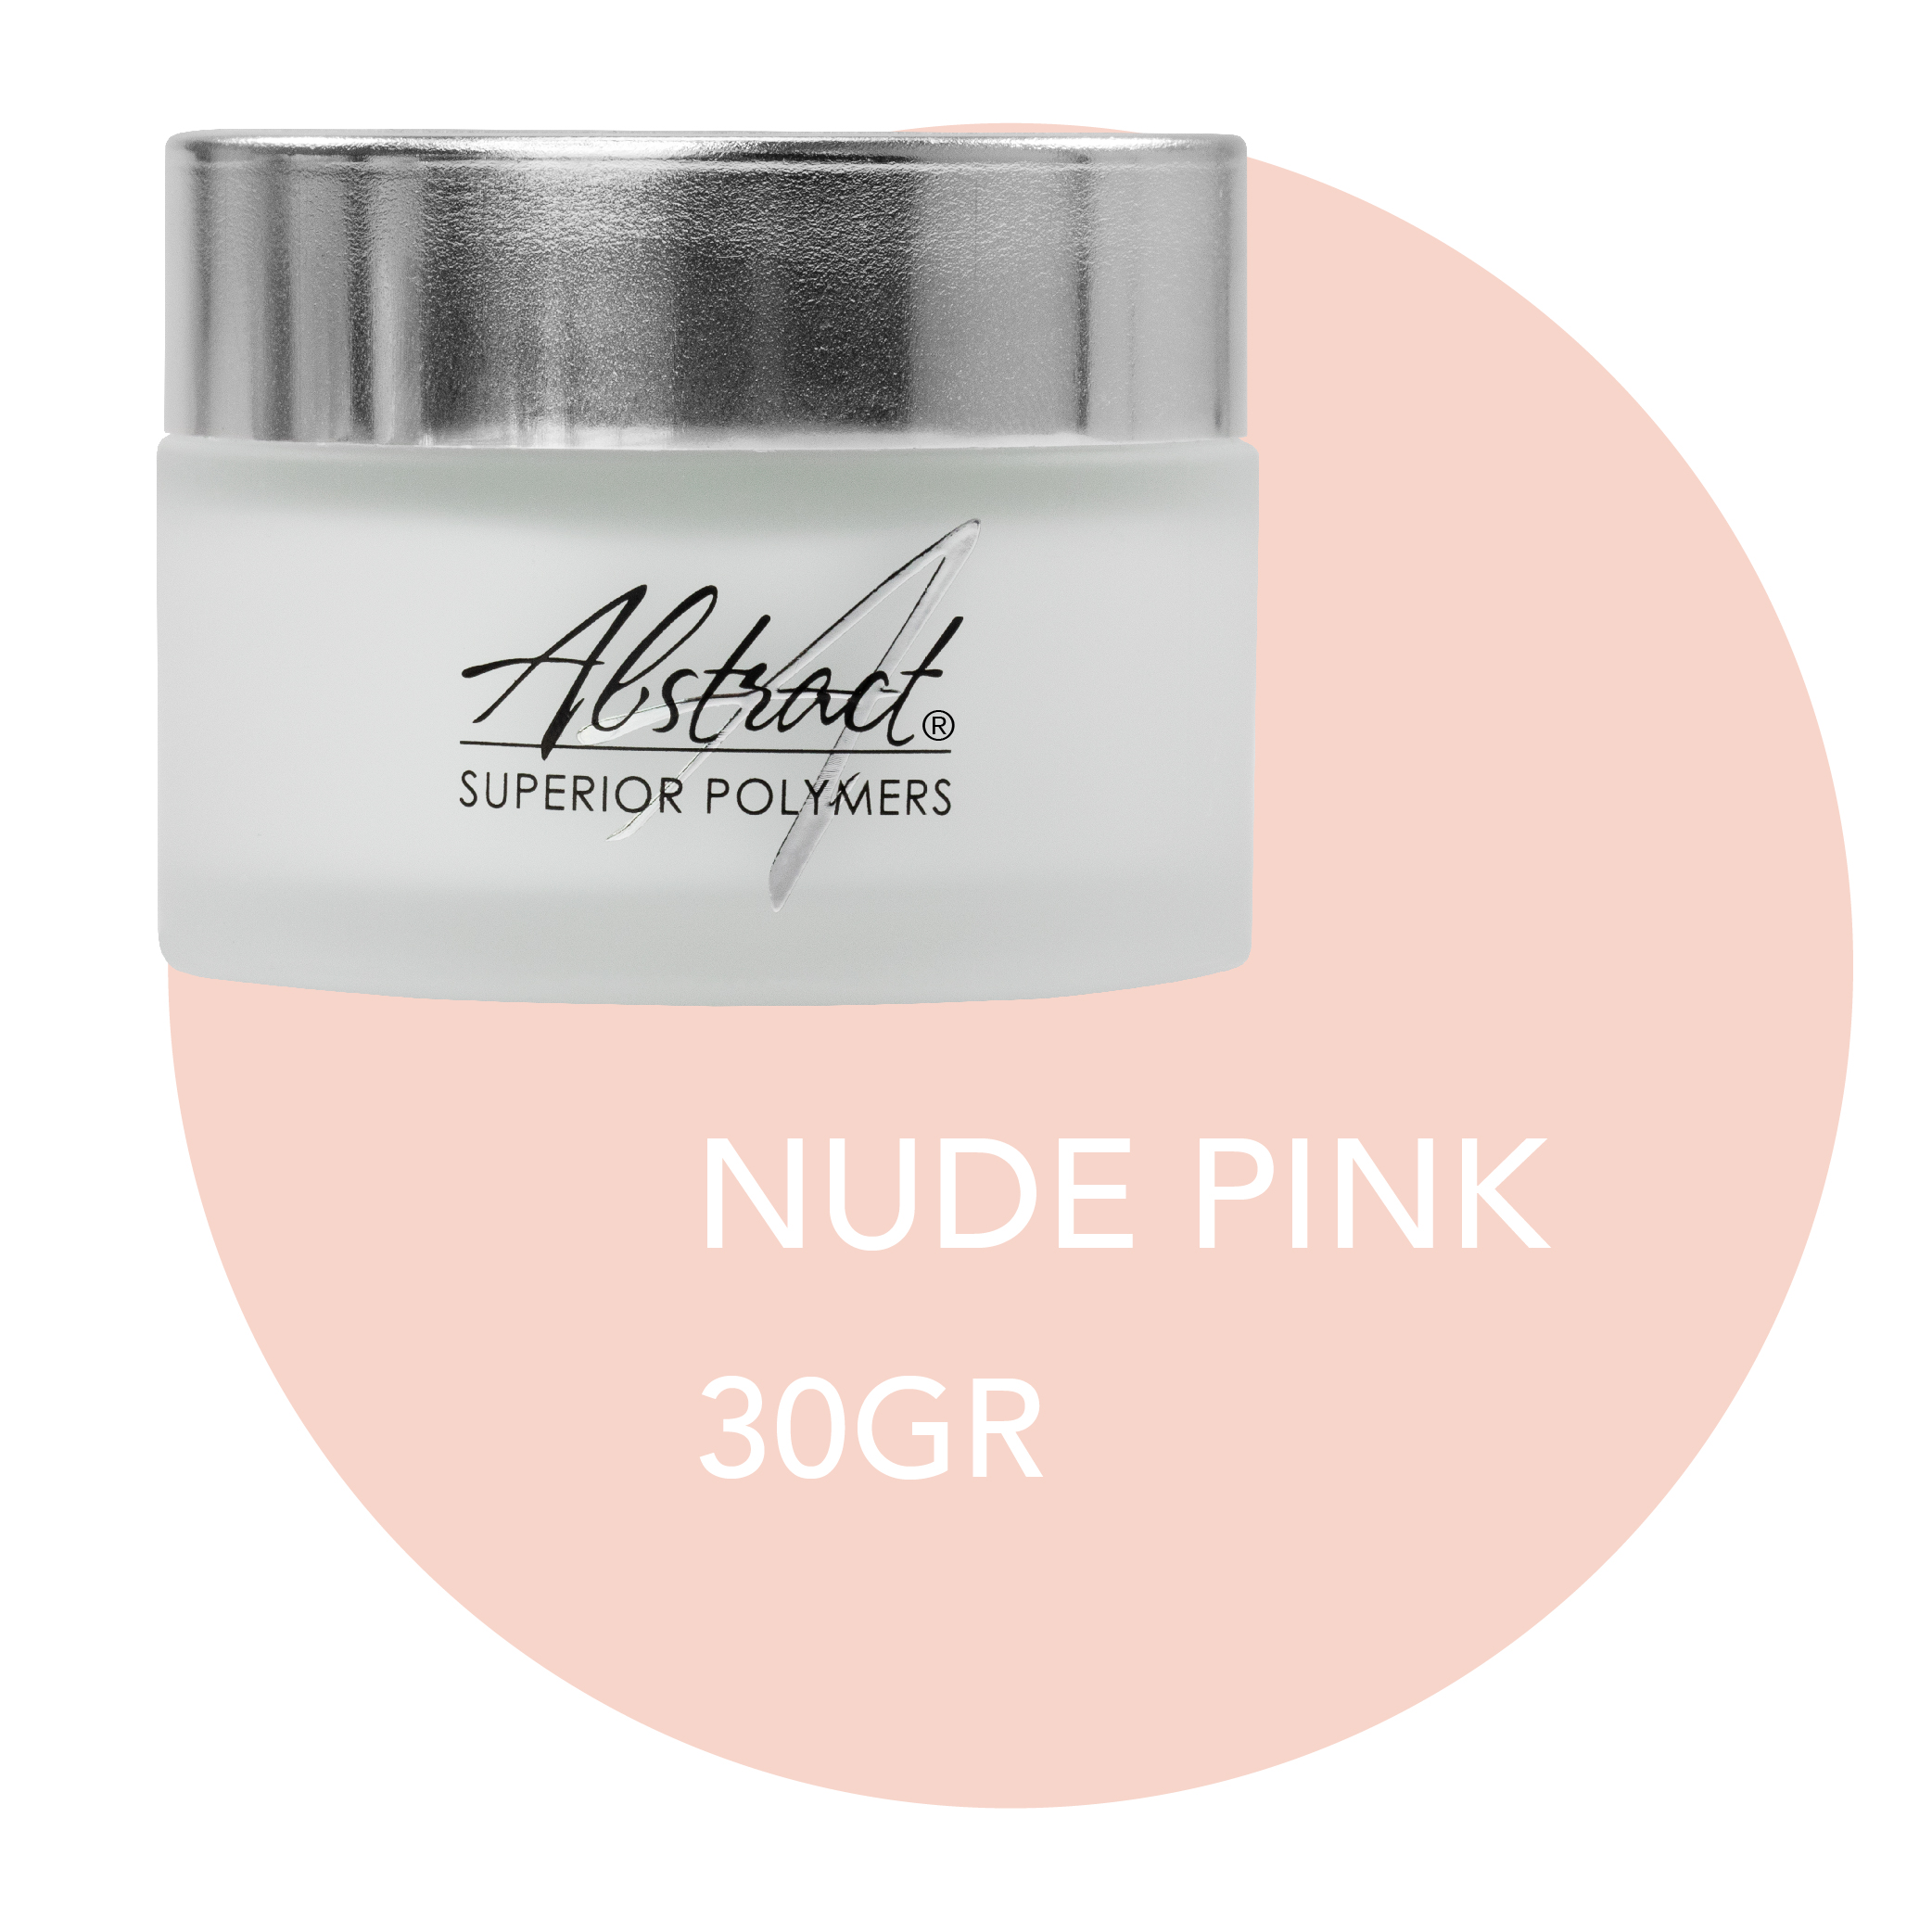 Superior Polymer NUDE PINK 30gr, Abstract | 233507